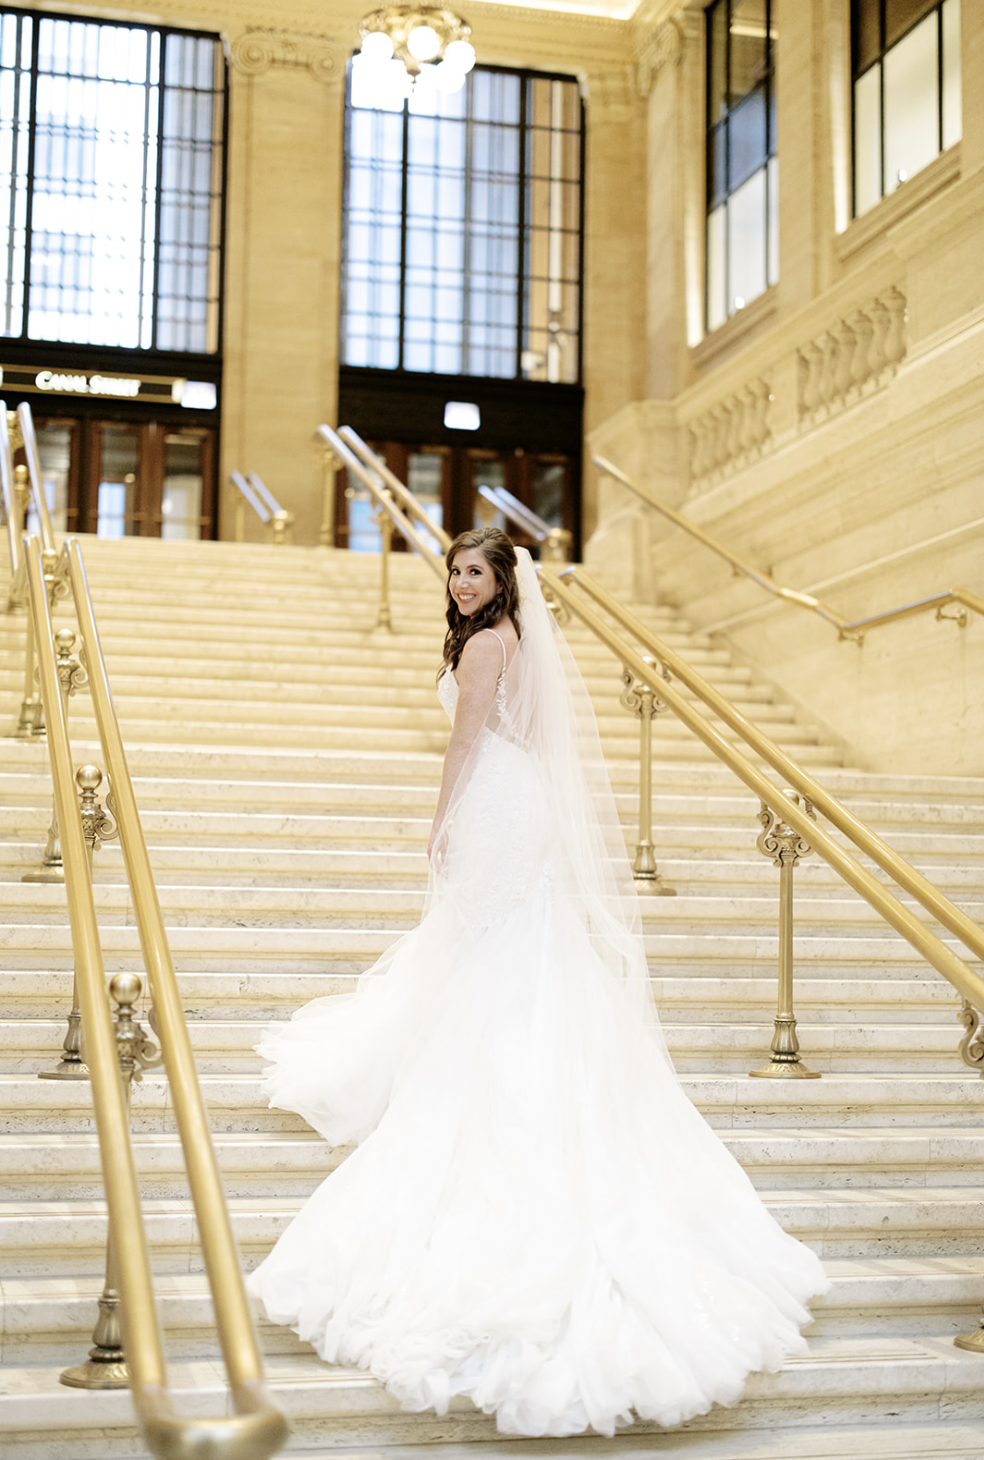 Chicago bride with brown hair and veil looks over her shoulder while standing on steps as gown cascades.